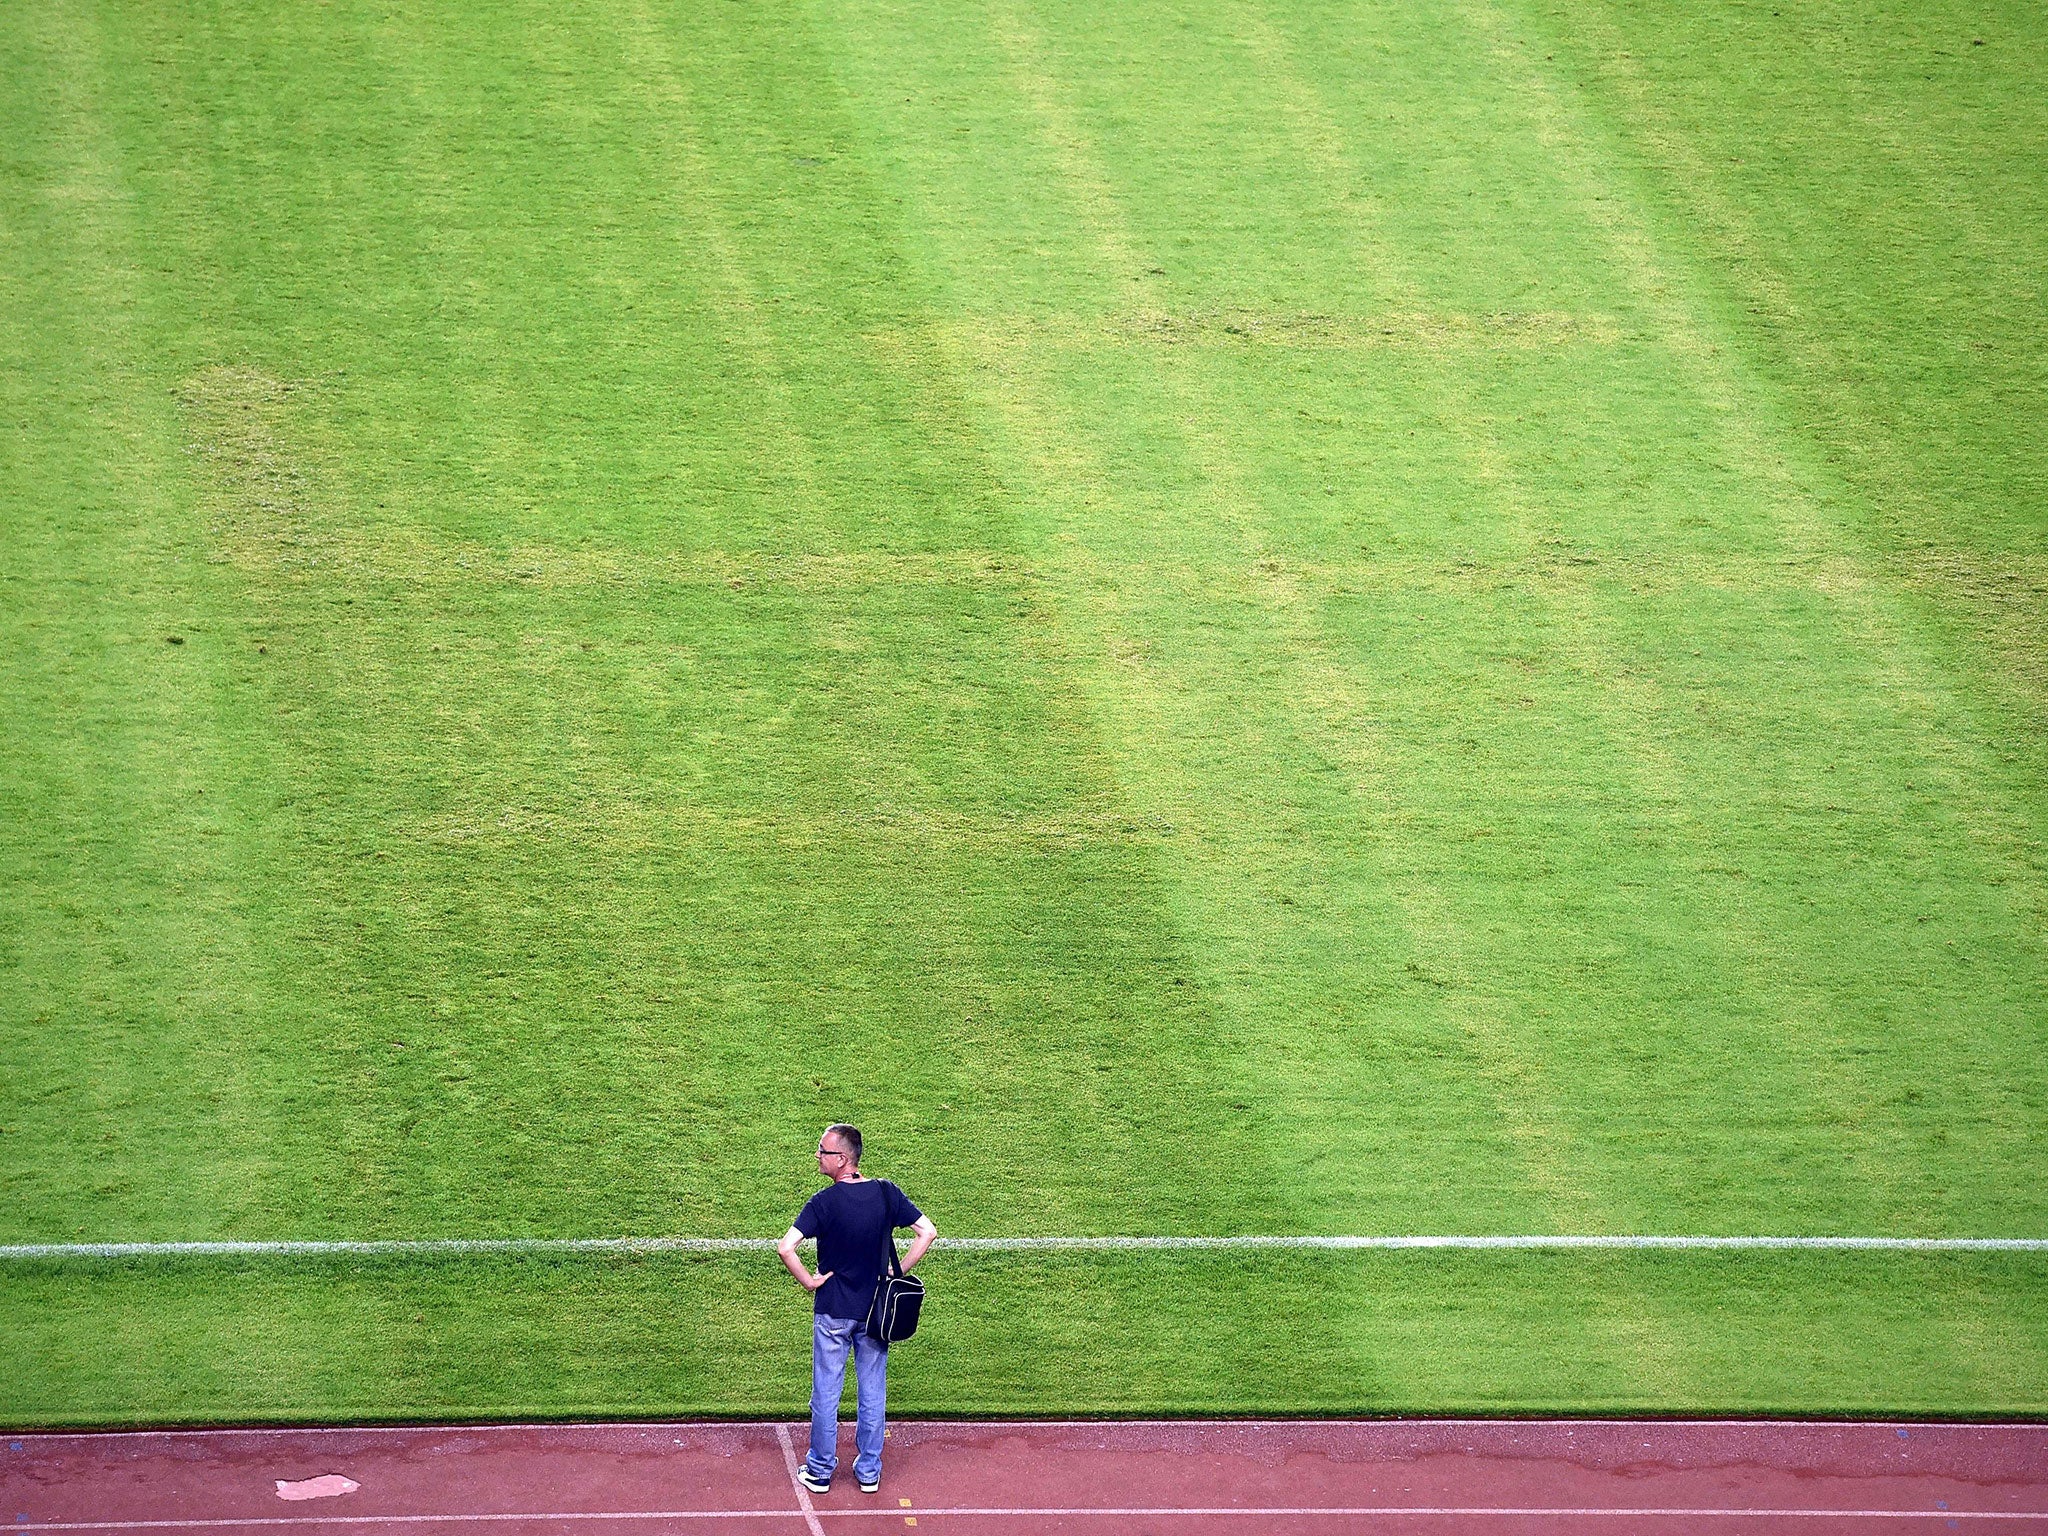 A swastika on the pitch during Croatia's match with Italy